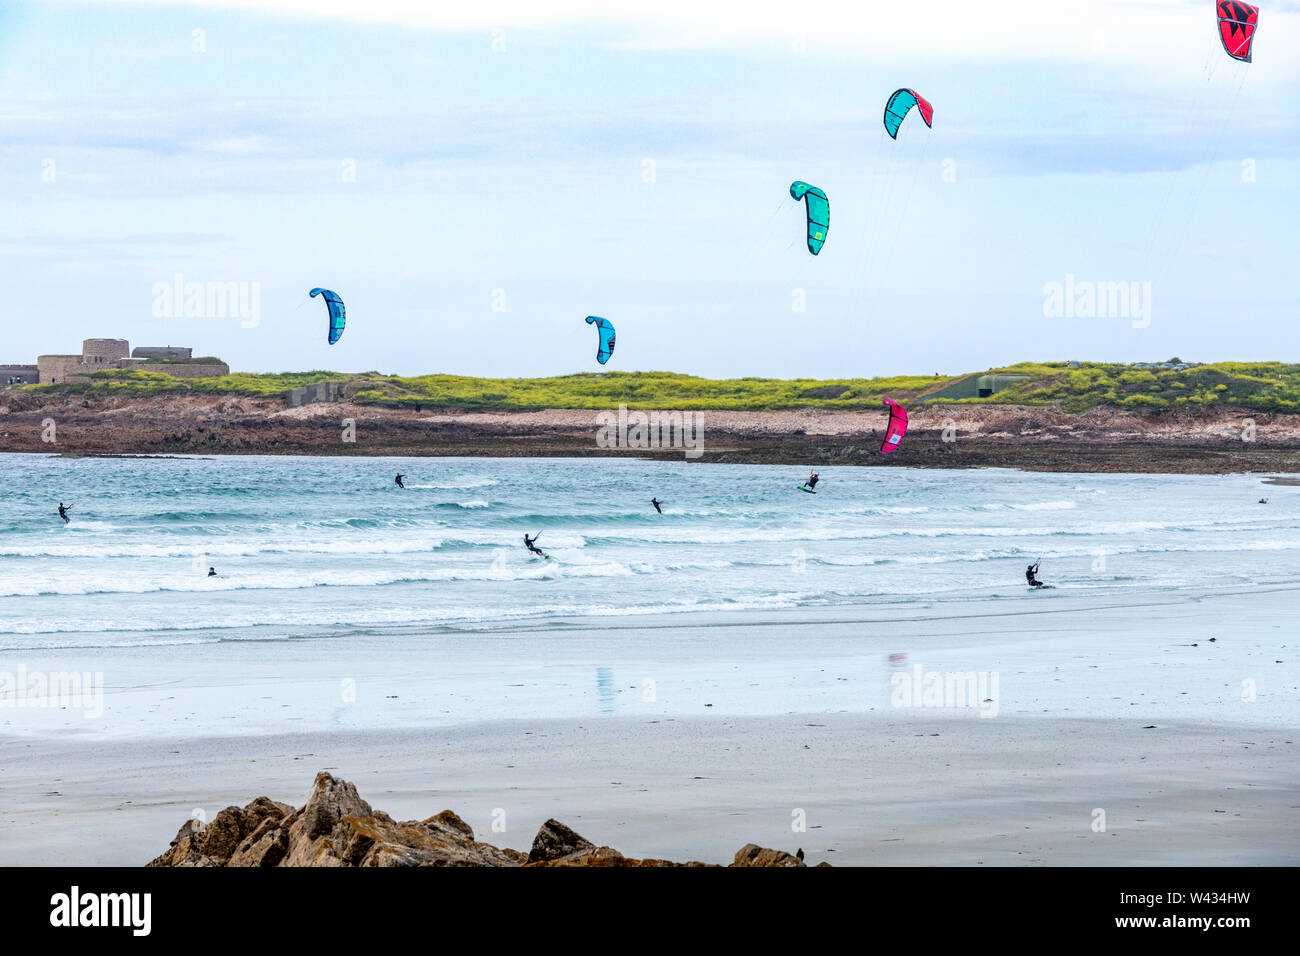 Kitesurfing in Vazon Bay, Guernsey, Channel Islands UK - Fort Hommet is in the background Stock Photo